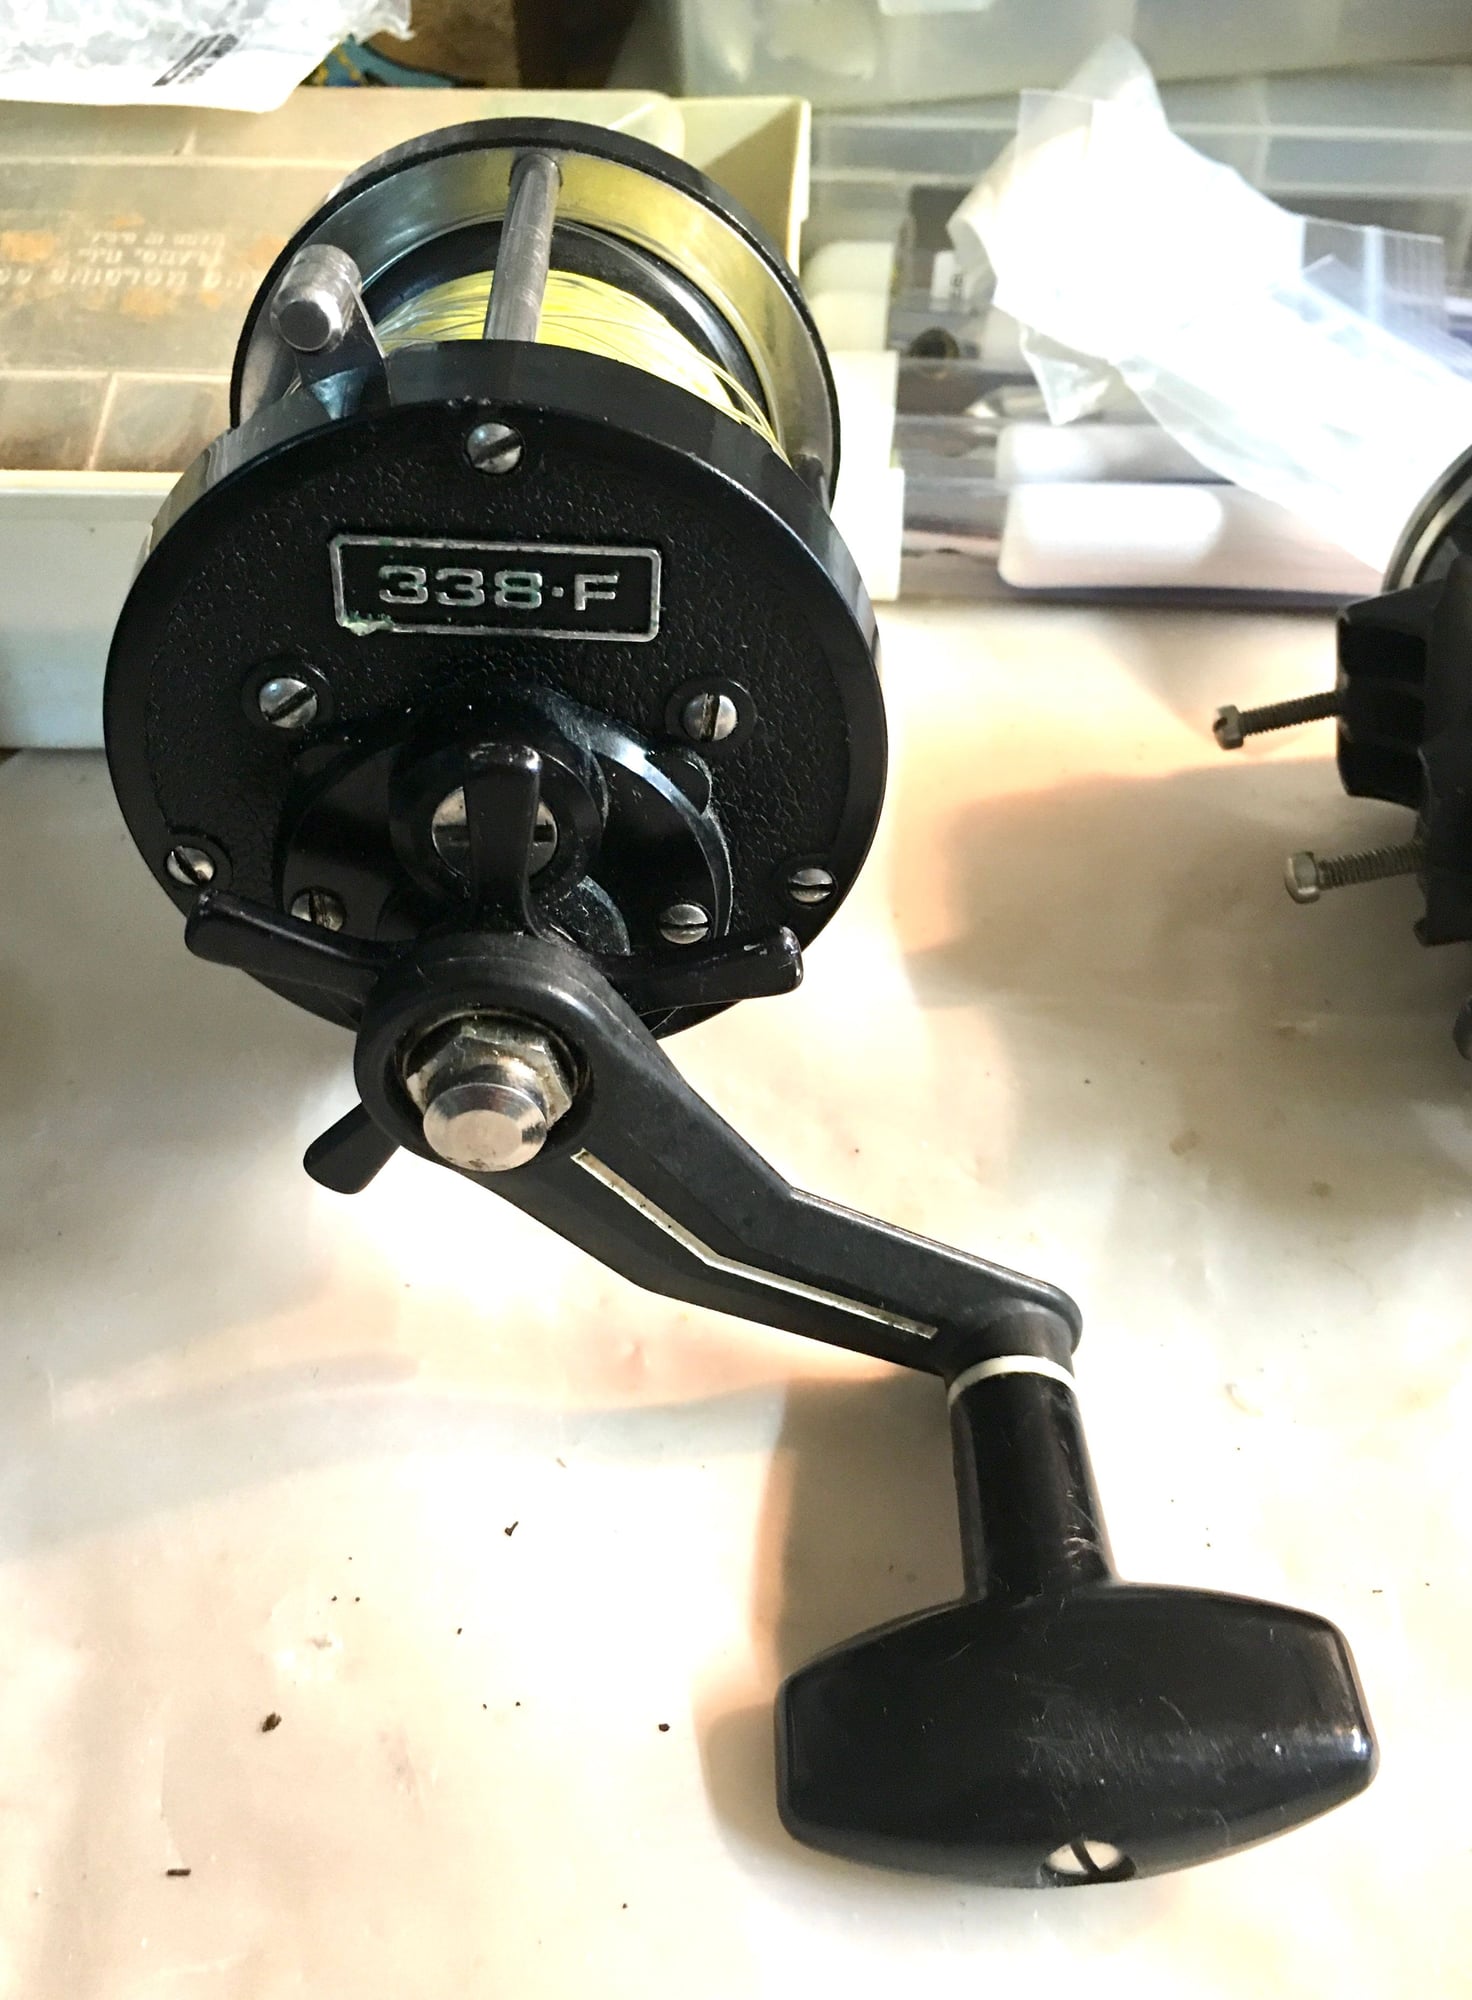 International - Looking for clear Newell reel 220